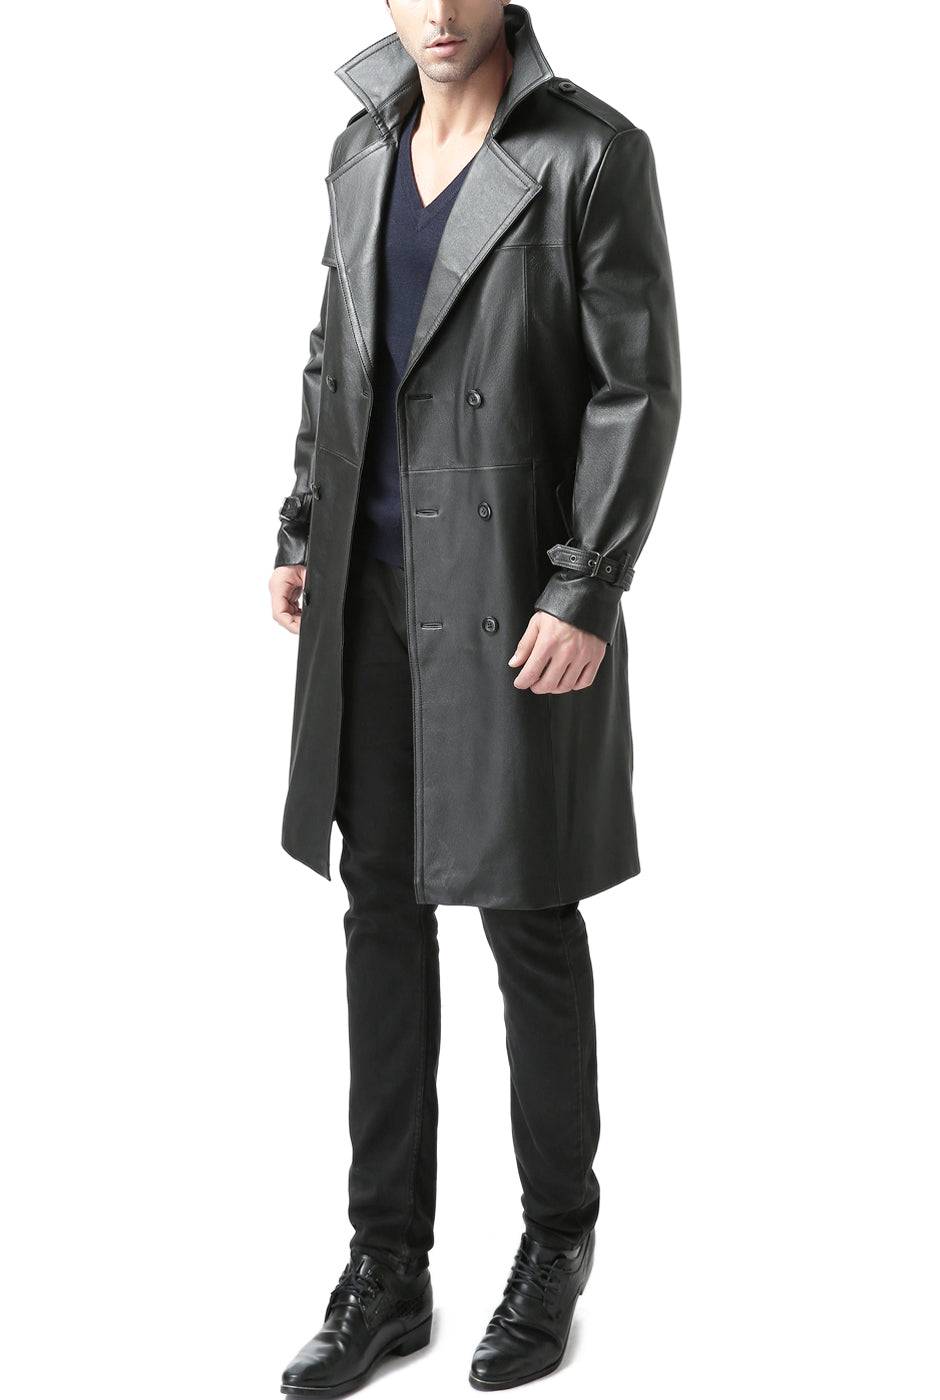 BGSD Monogram Collection Men Classic Leather Long Trench Coat